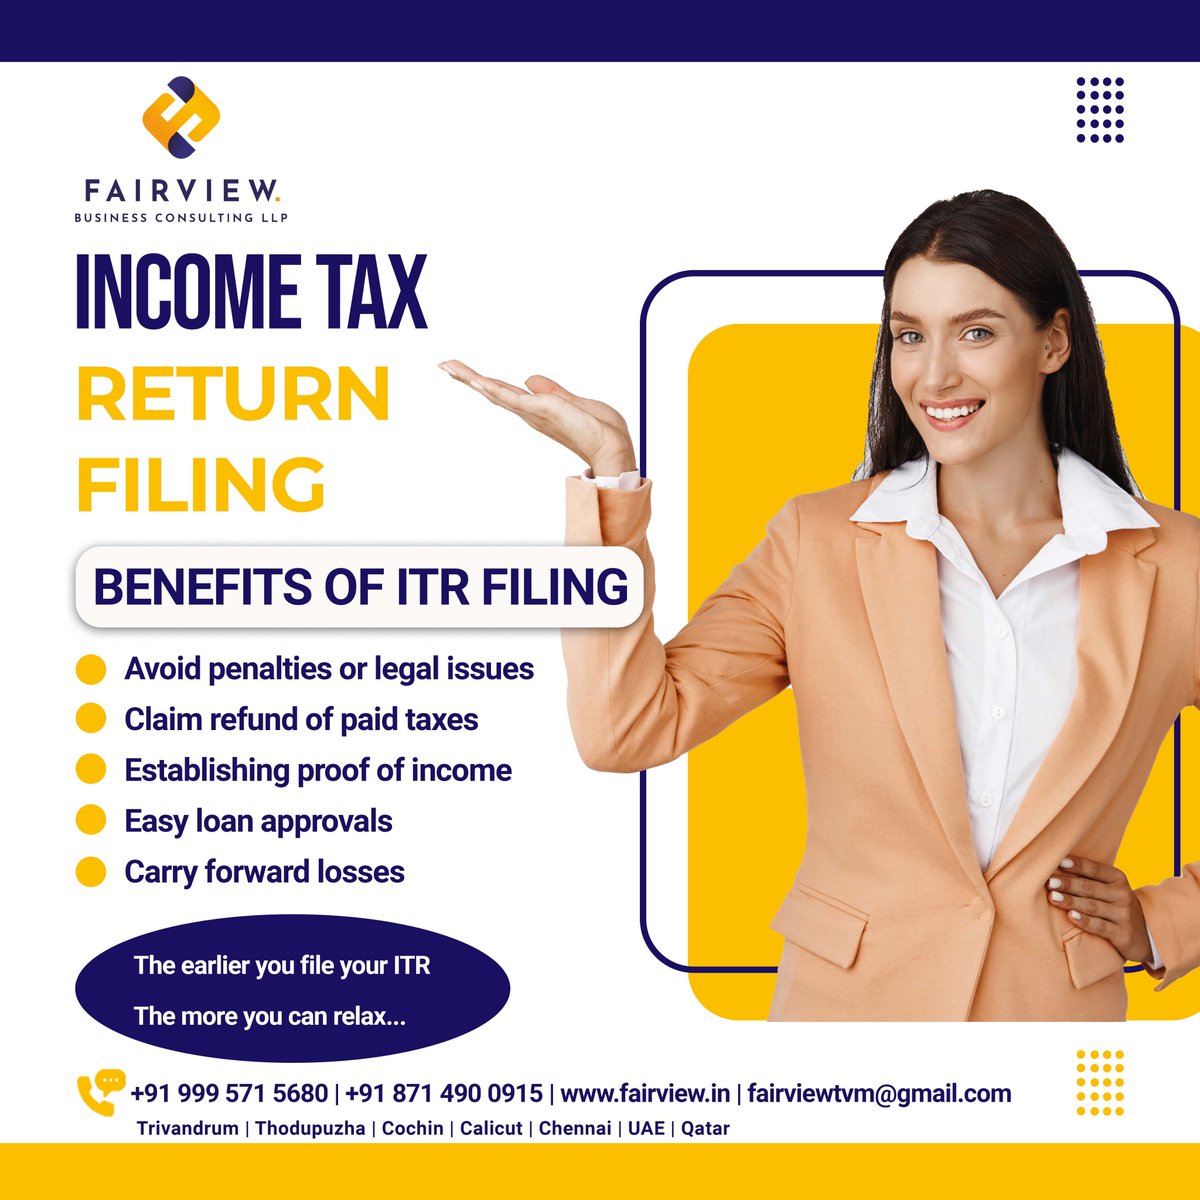 File Your ITR now!!
#companyregistration #gst #company #business #registration #startup #tax #trademark #businessregistration #companyformation #fssai #gstregistration #incometax #msme #gstupdates #startupbusiness #india #gstfiling #ITR